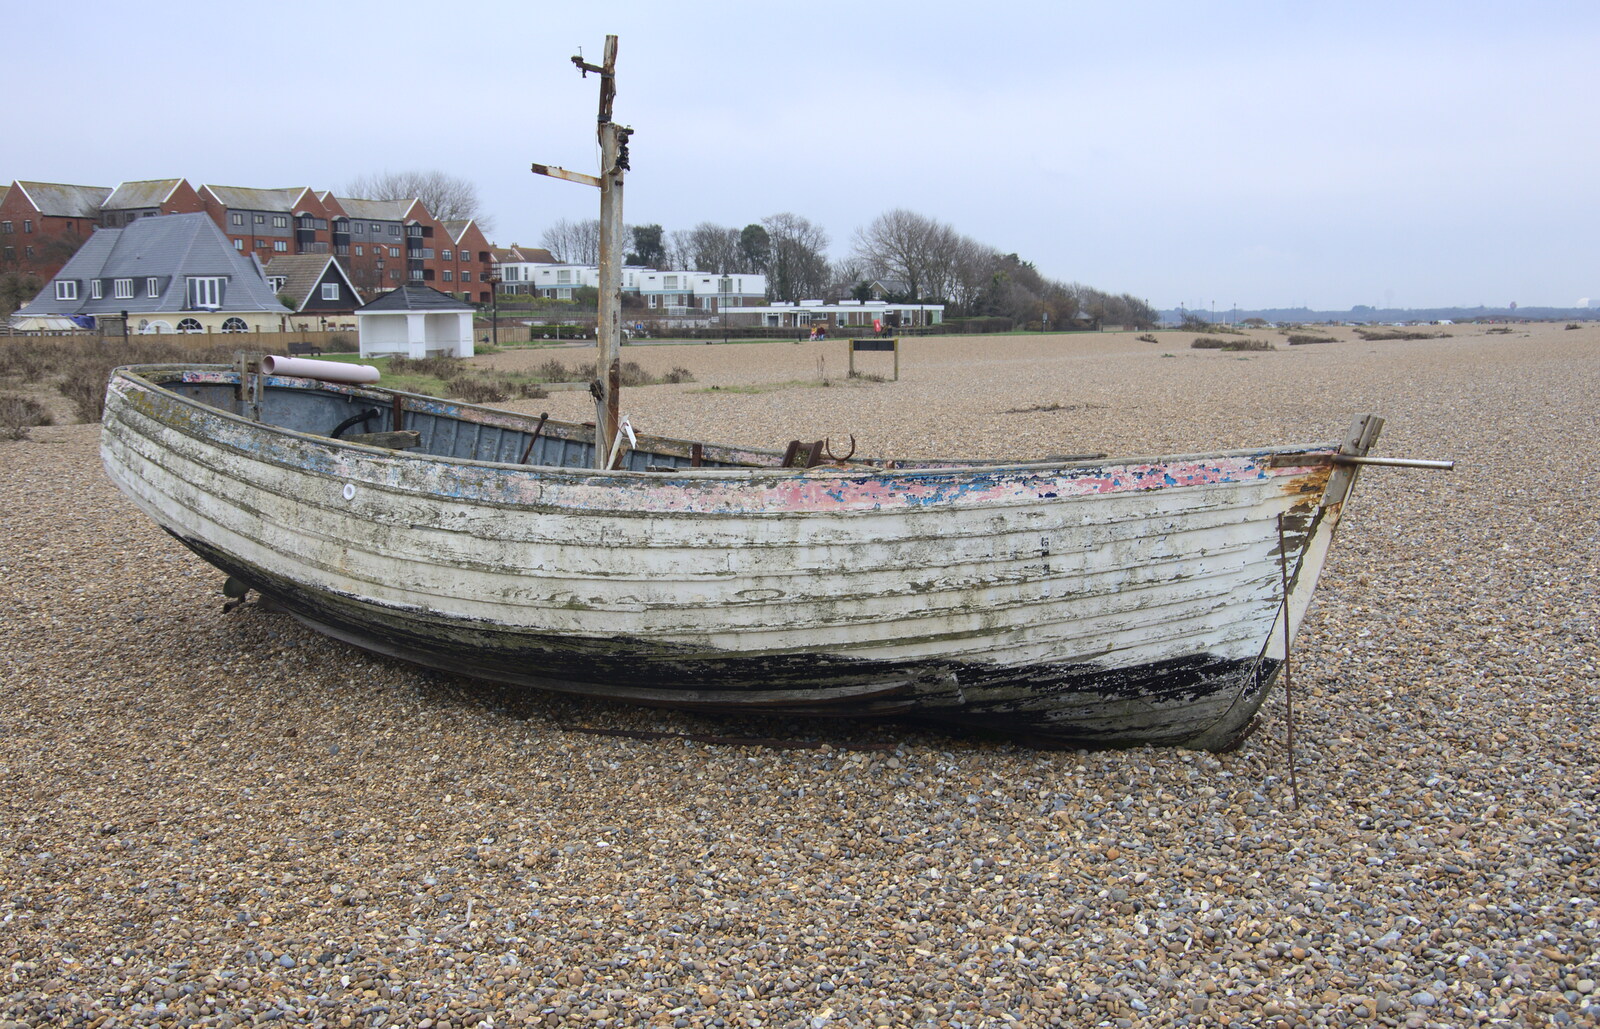 The derelict boat on the beach from A Postcard from Aldeburgh, Suffolk - 6th January 2019